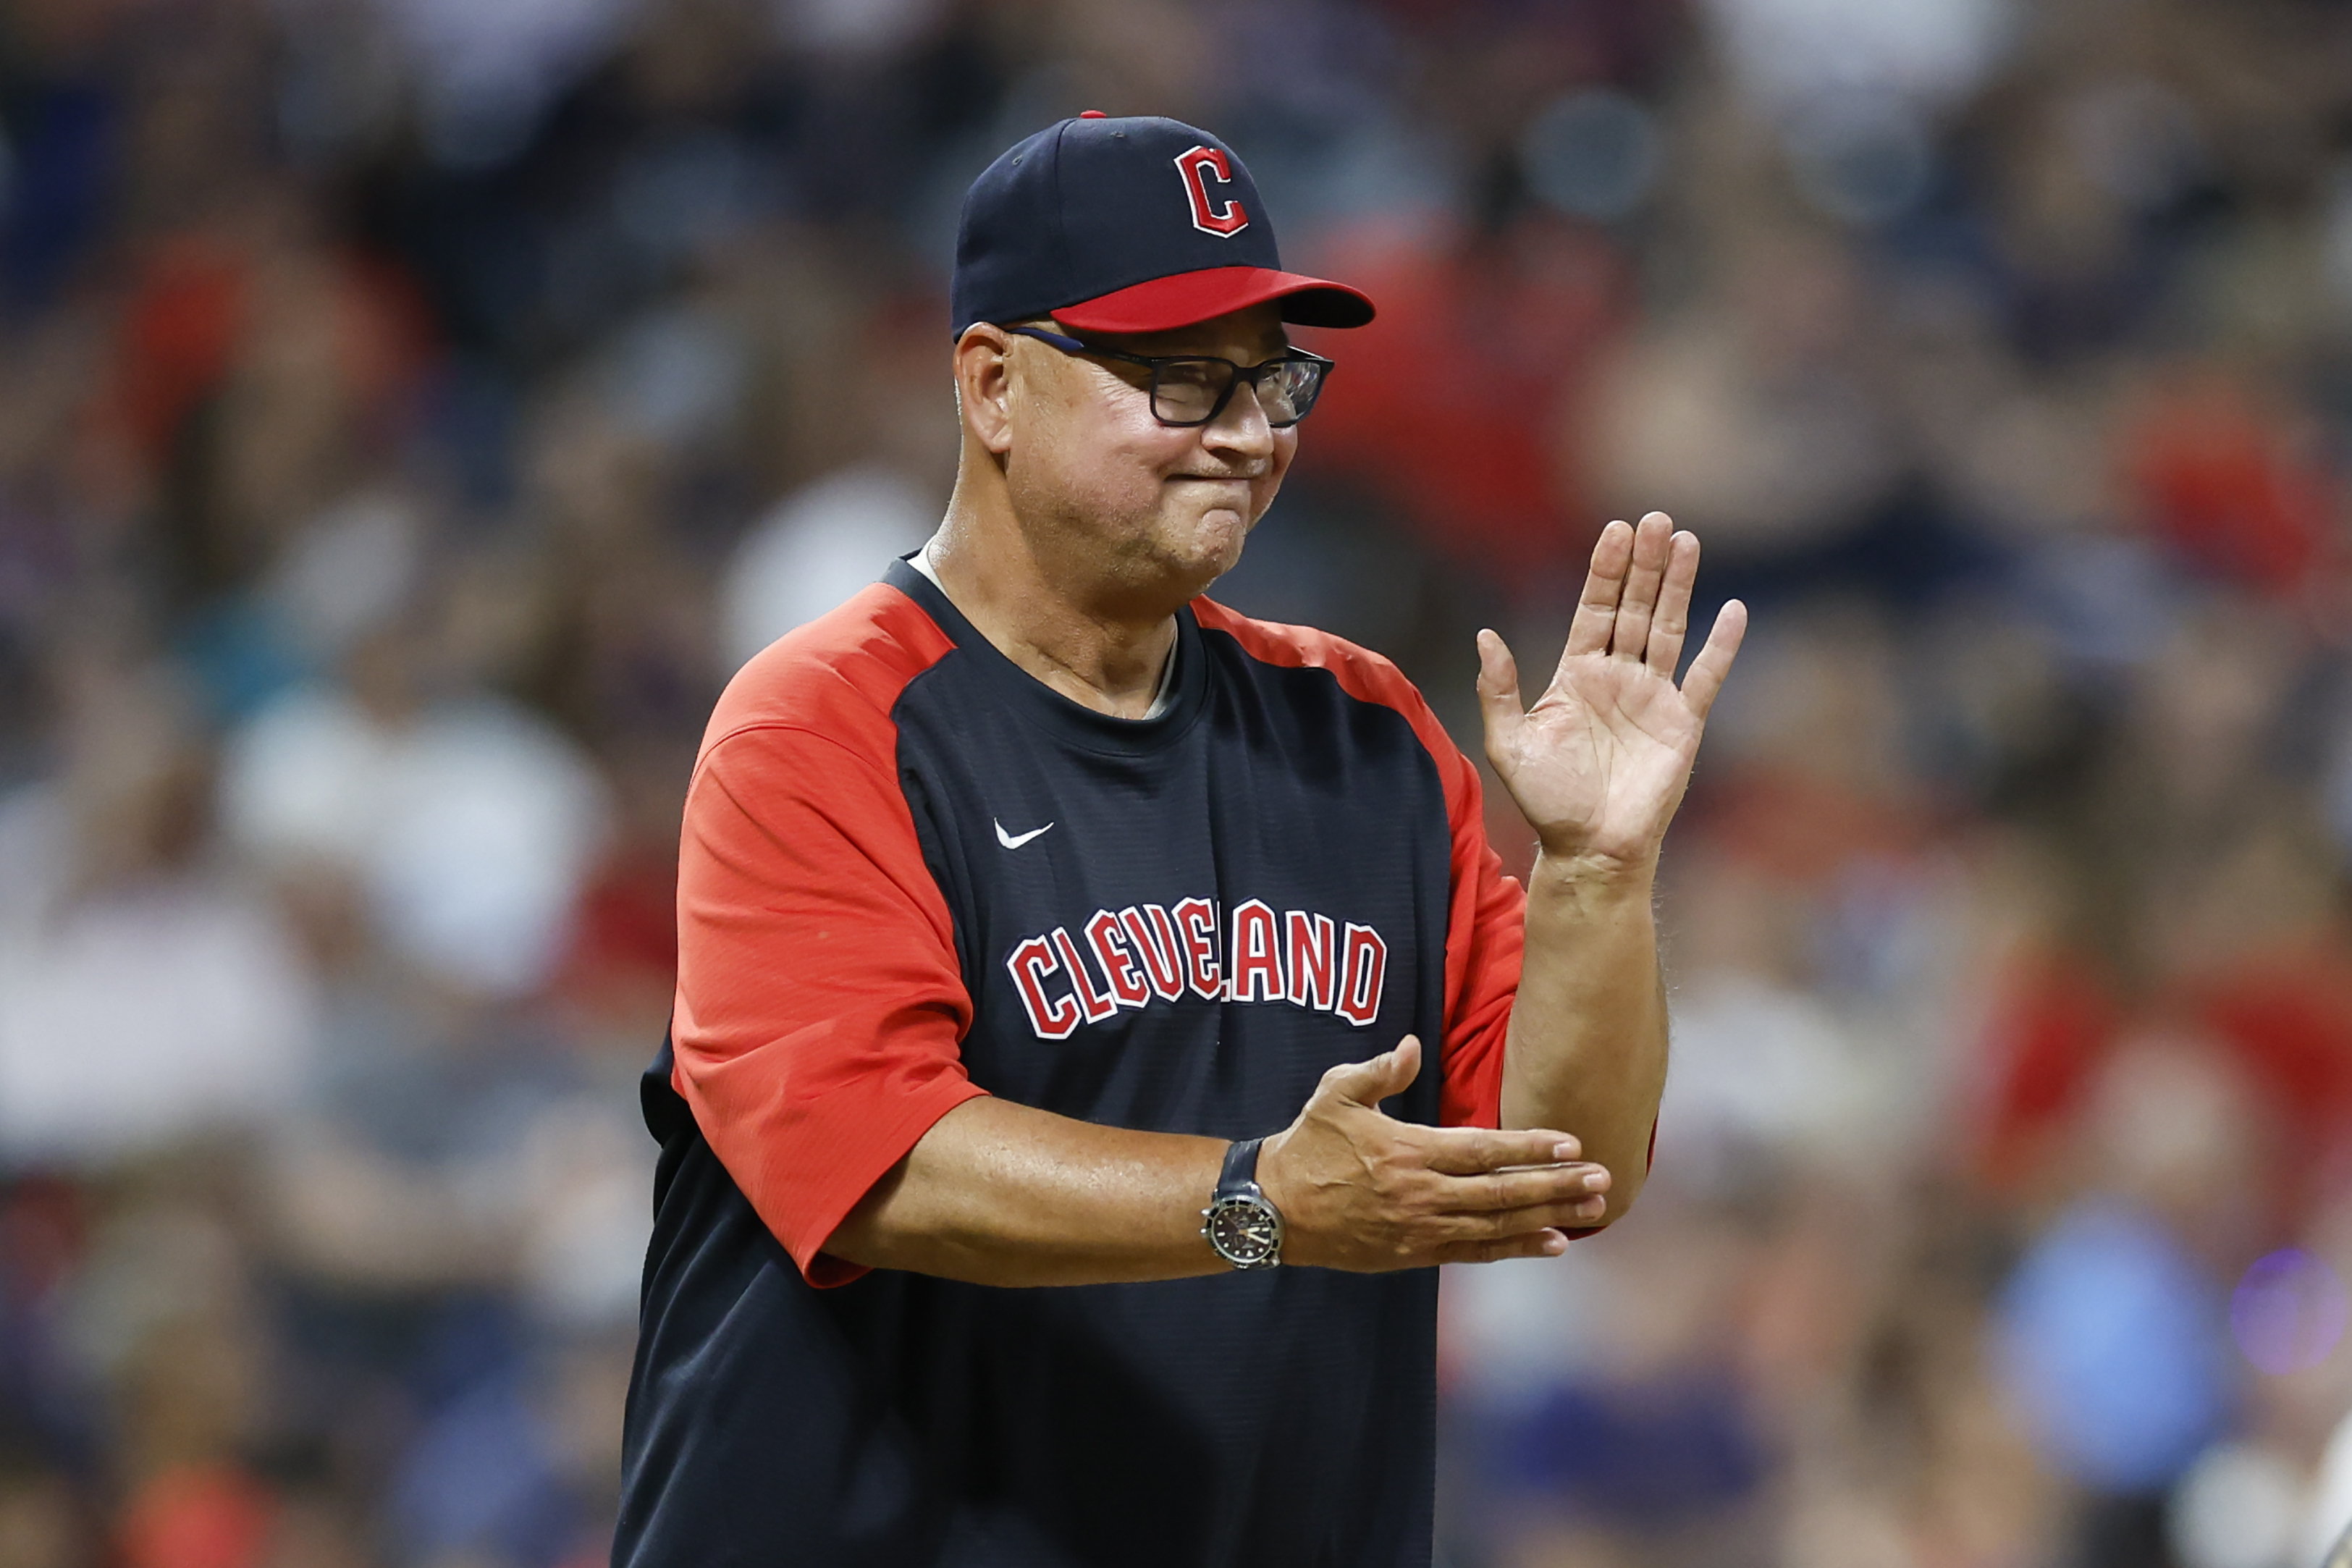 Terry Francona steps away as Guardians manager, will assume